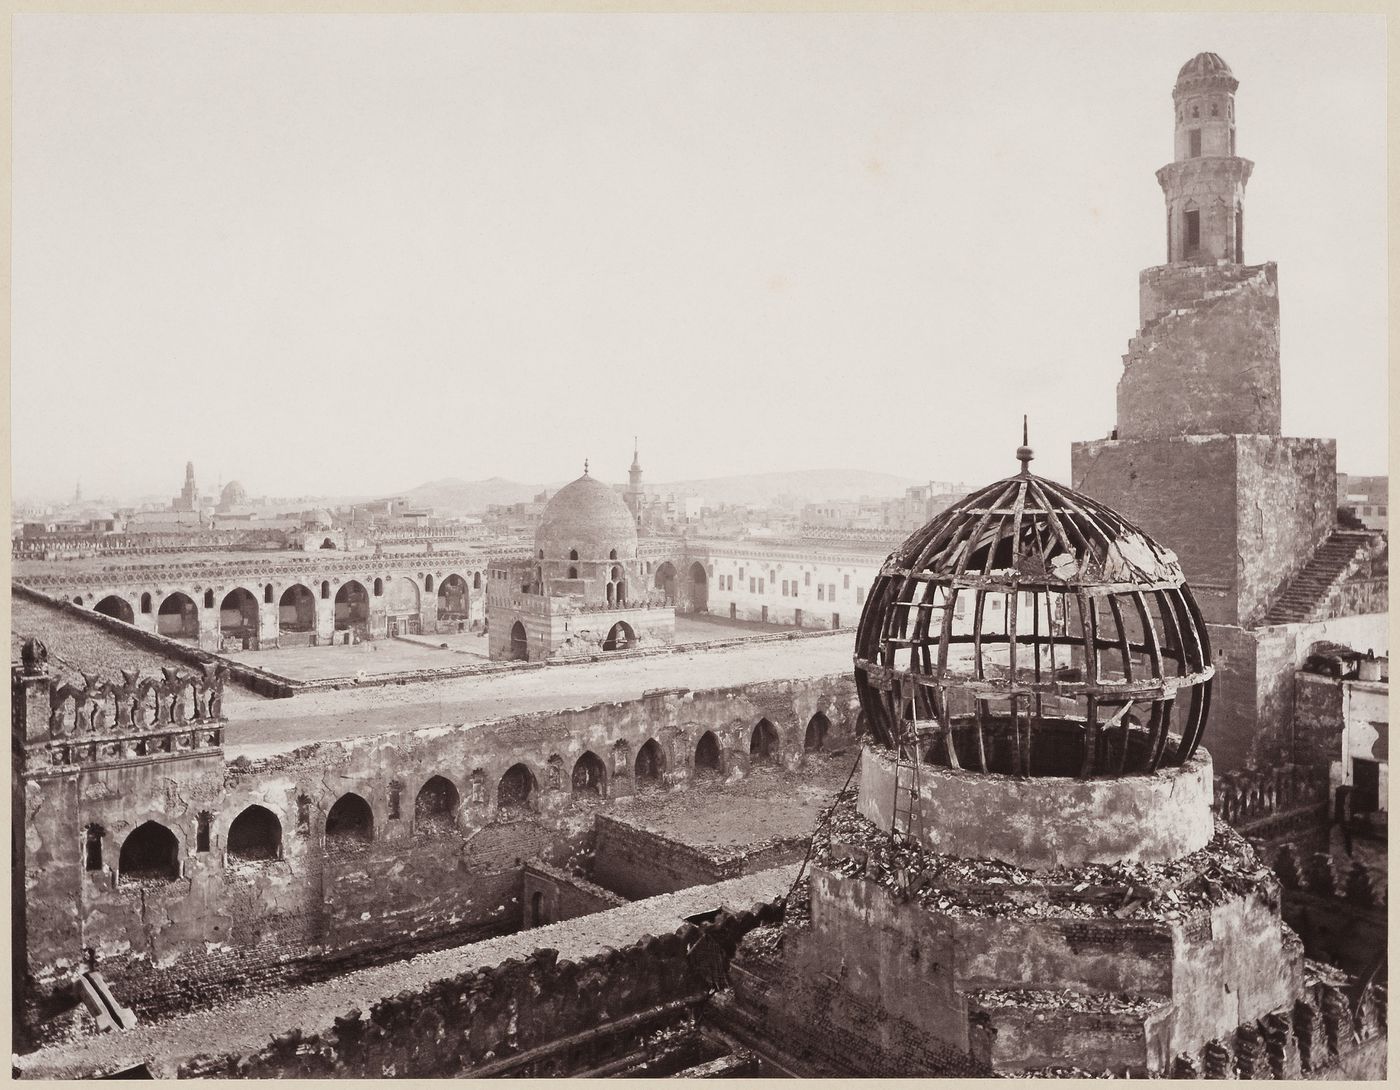 View from minaret of Mosque Sarahatmish, overlooking dome of mosque, Mosque of Ahmad ibn Tulun behind, Cairo, Egypt